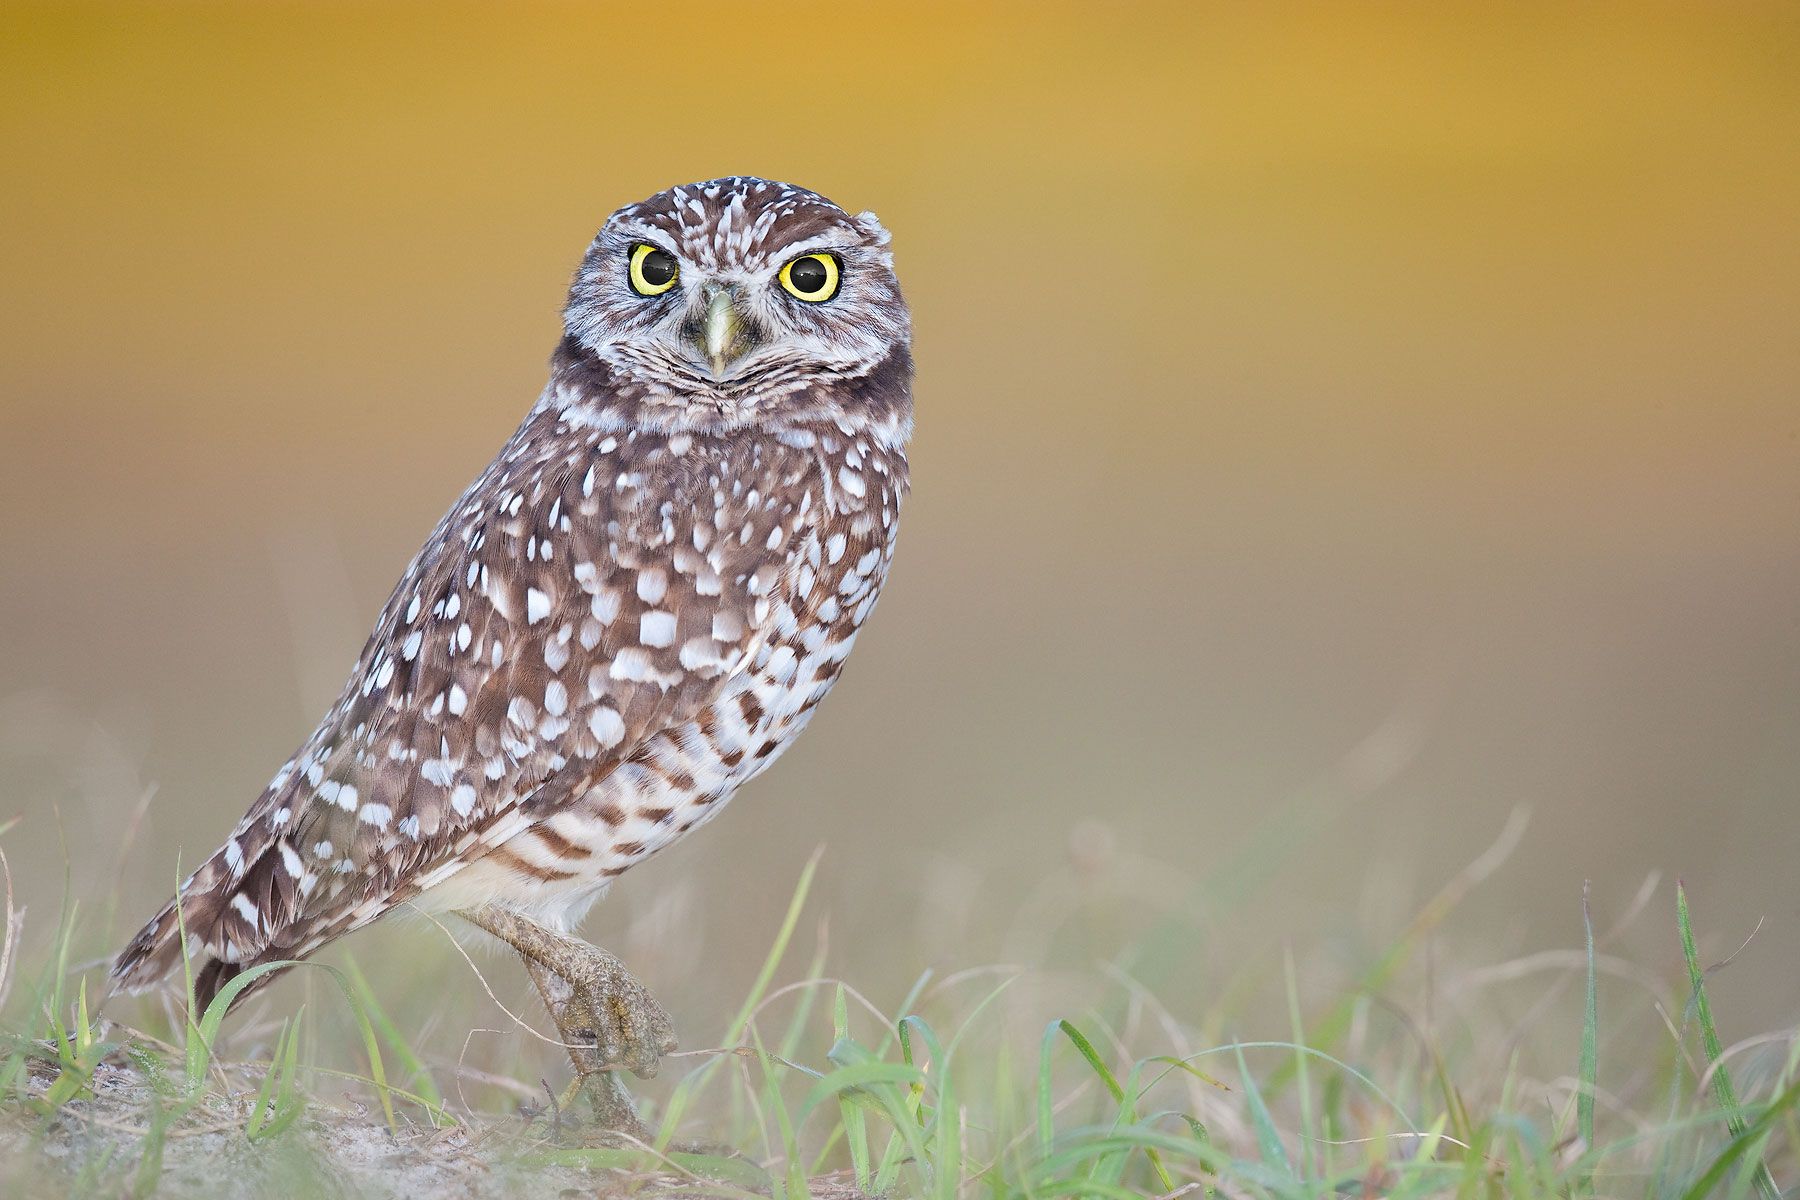 Burrowing-Owl-against-yellow-bkgd-02100405-Cape-Coral,-FL.jpg